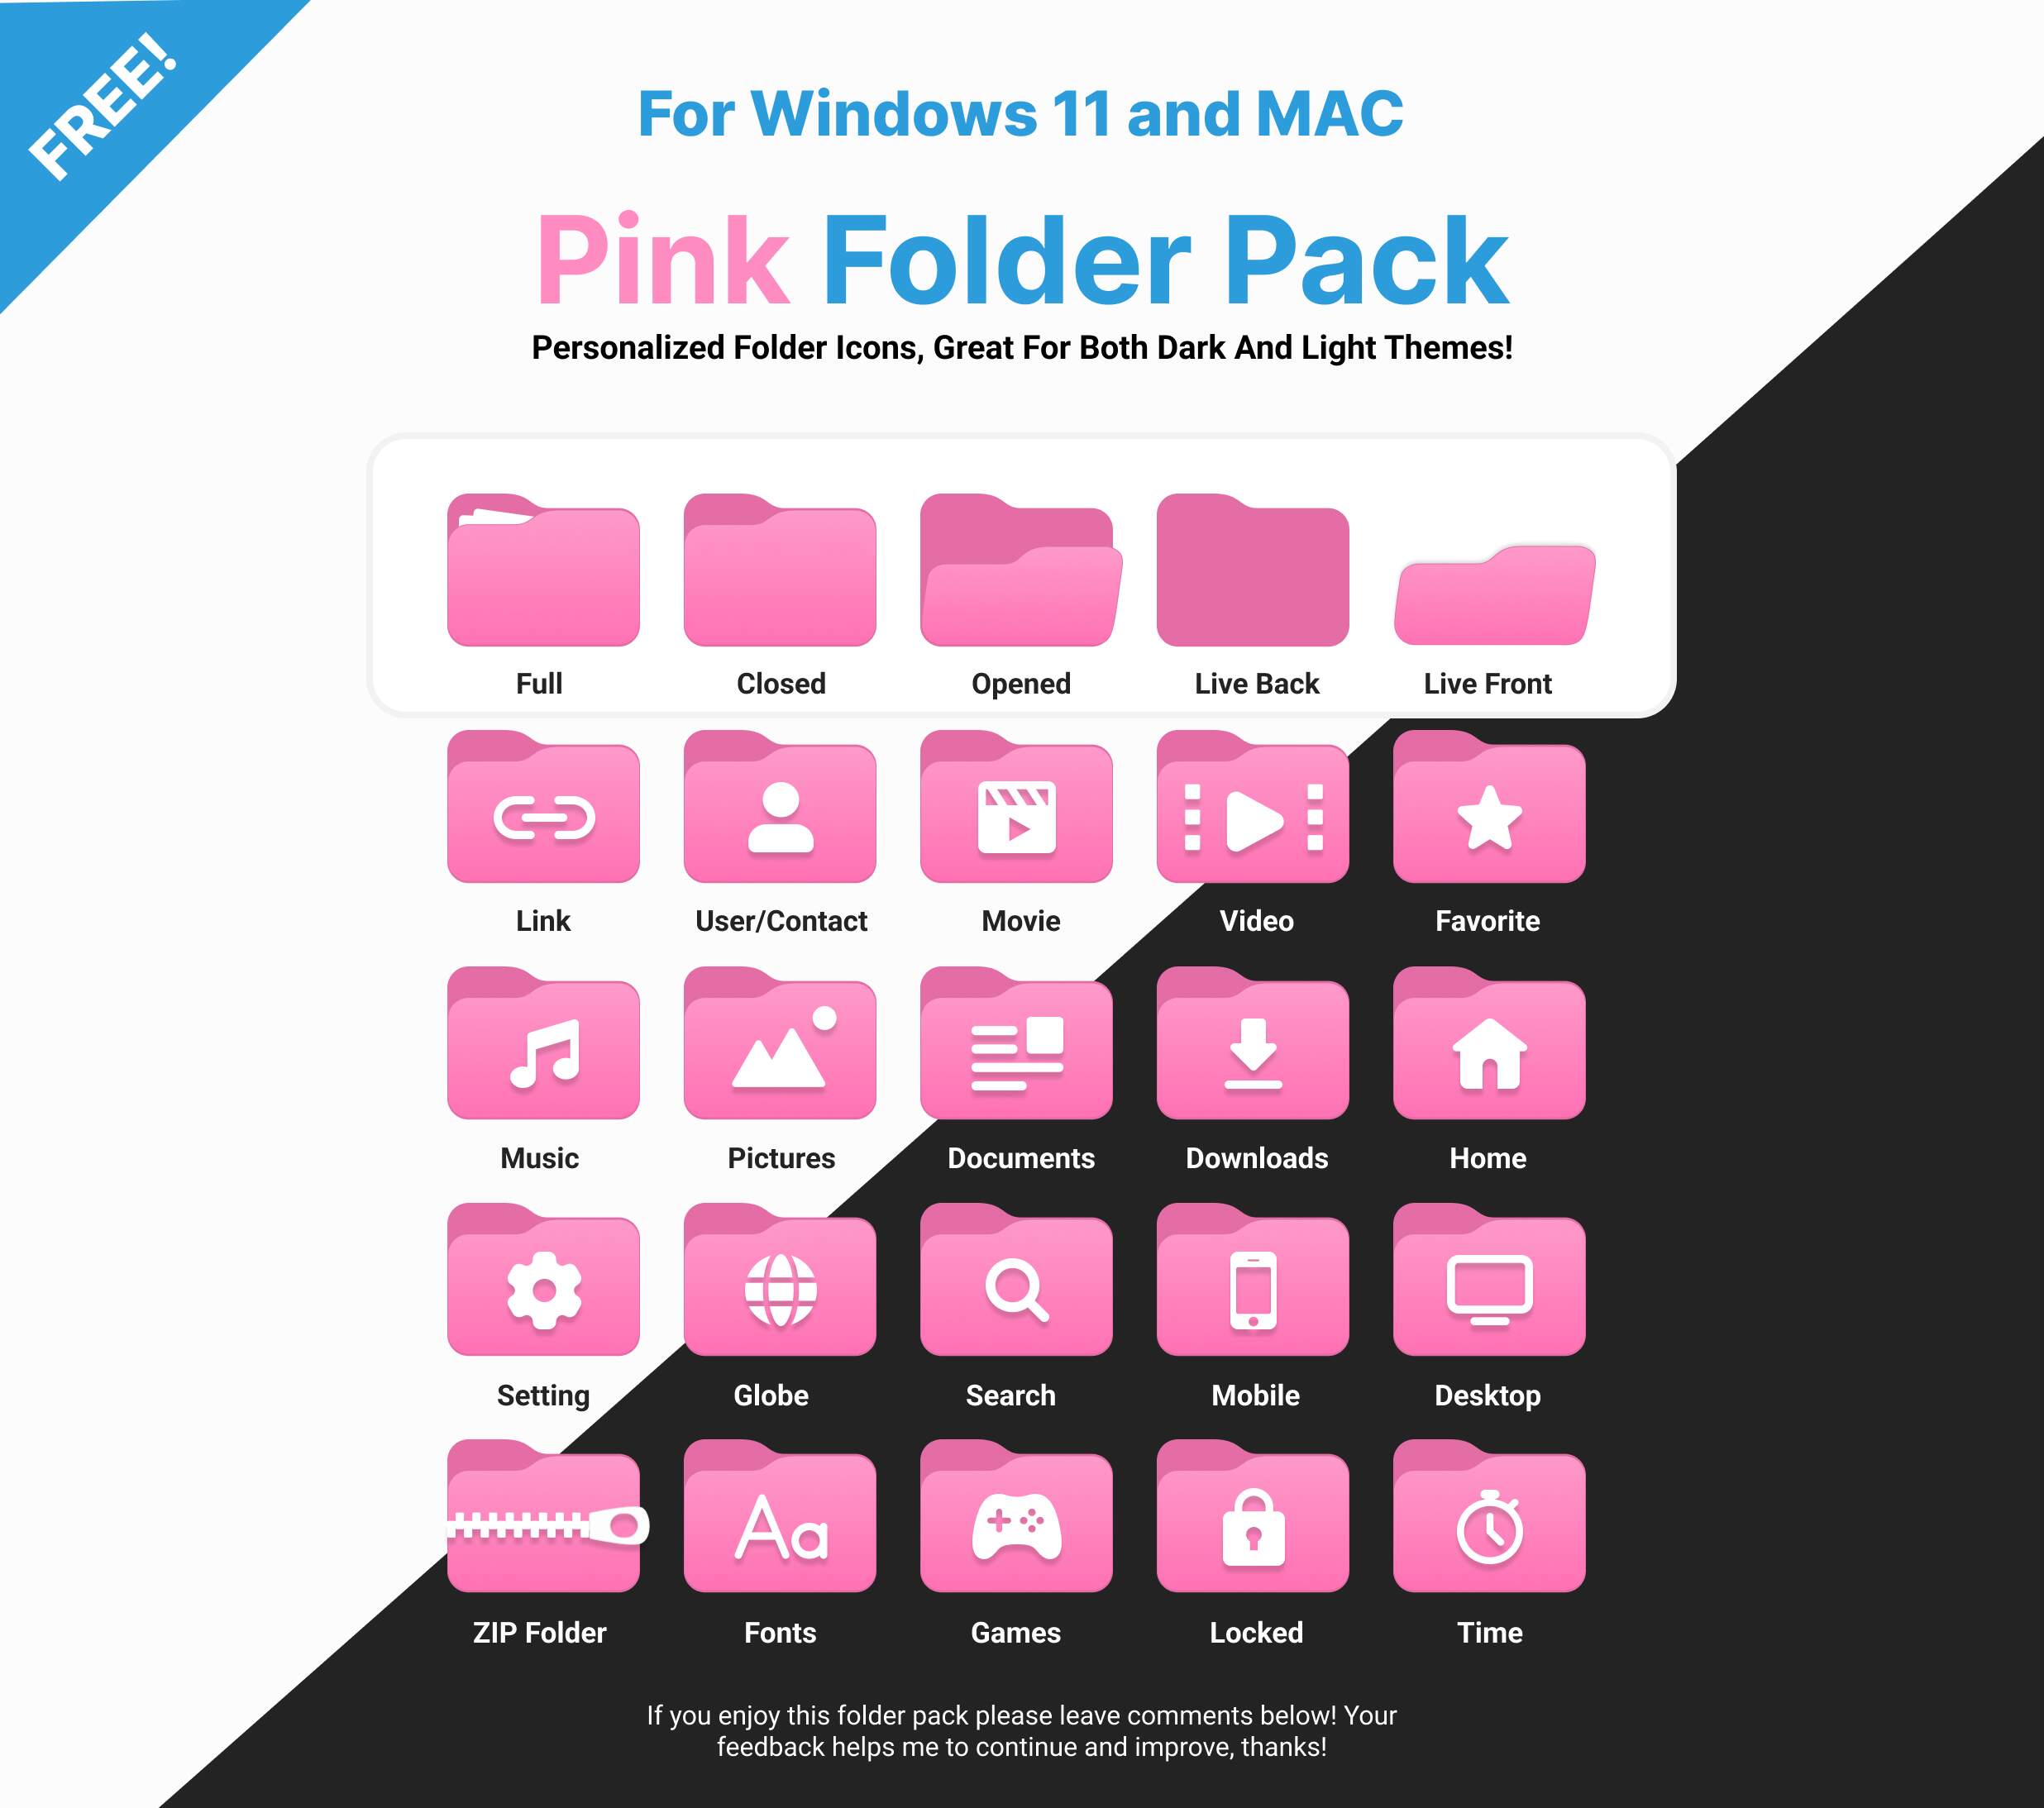 FREE Windows 11 / MAC Pink Folder Icon Pack! by SapphireBlueDesigns on ...